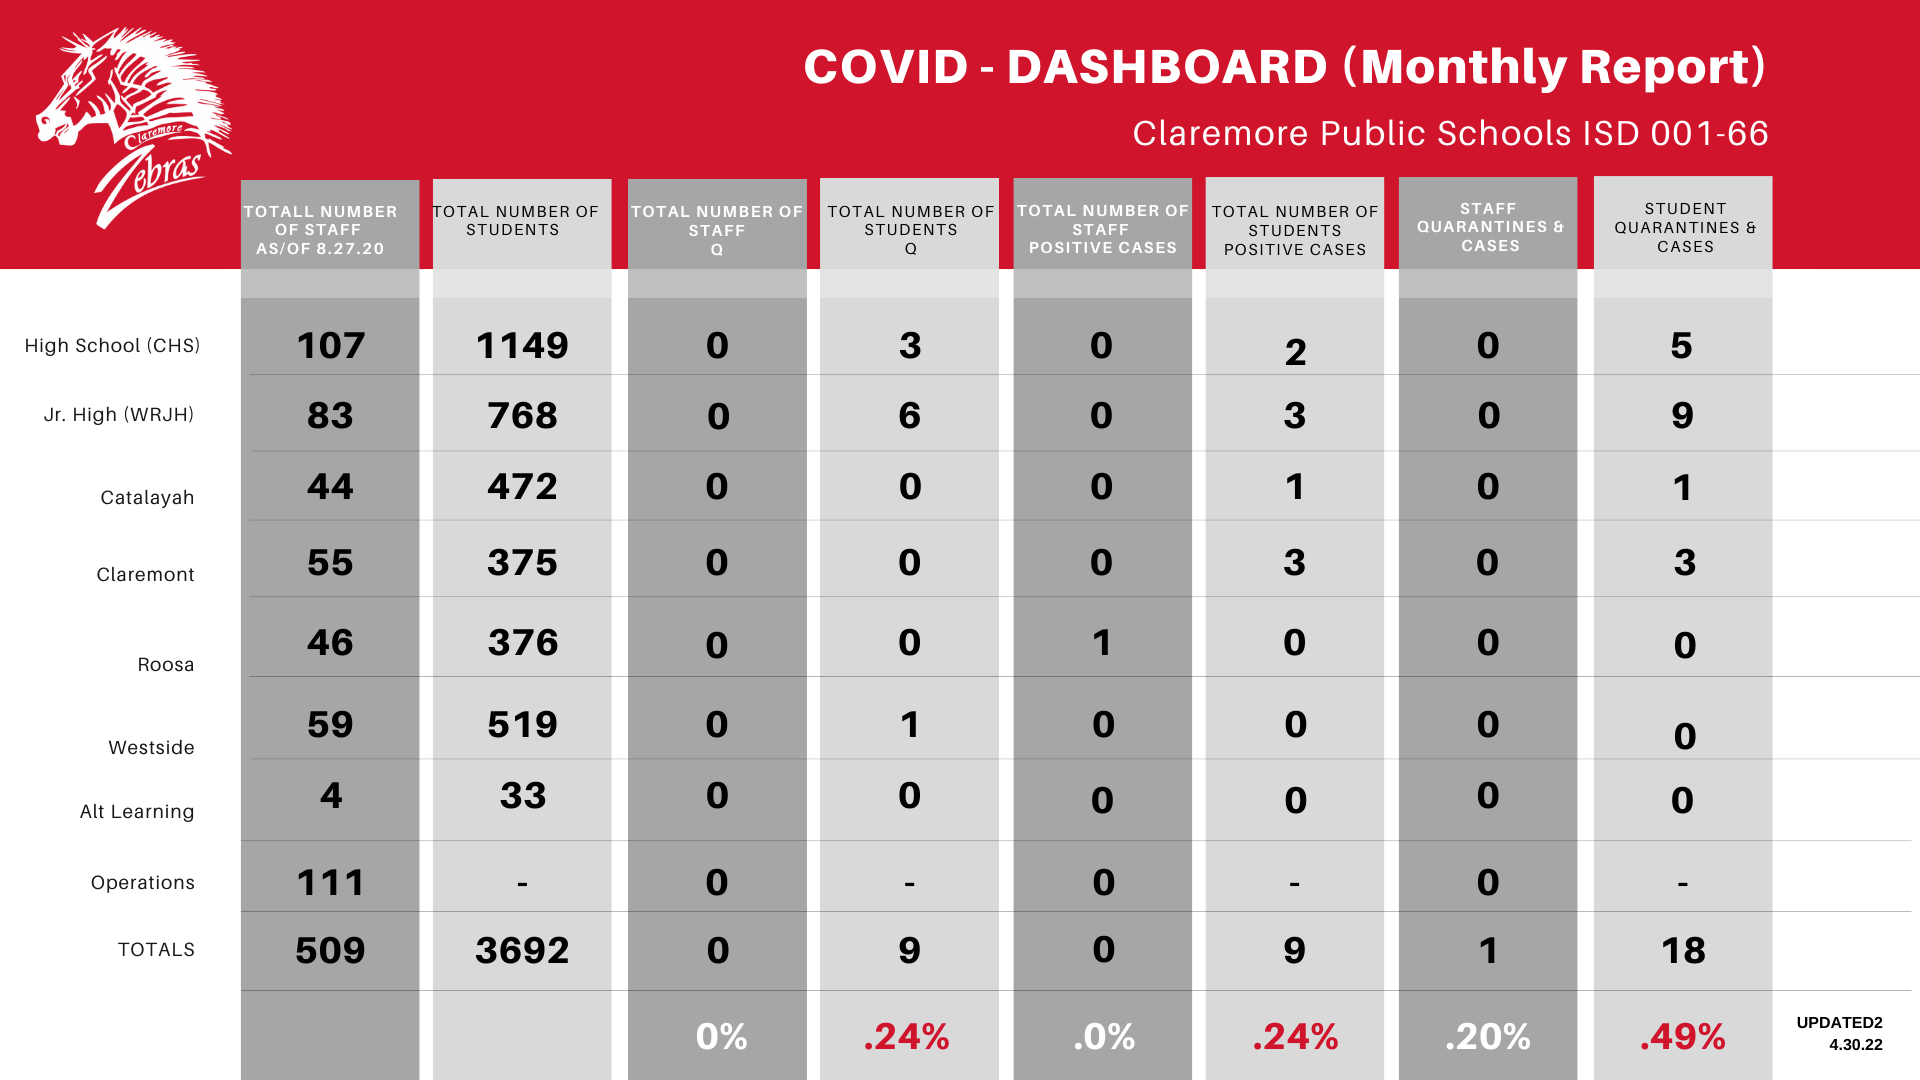 COVID DASHBOARD MONTHLY REPORT DATA.